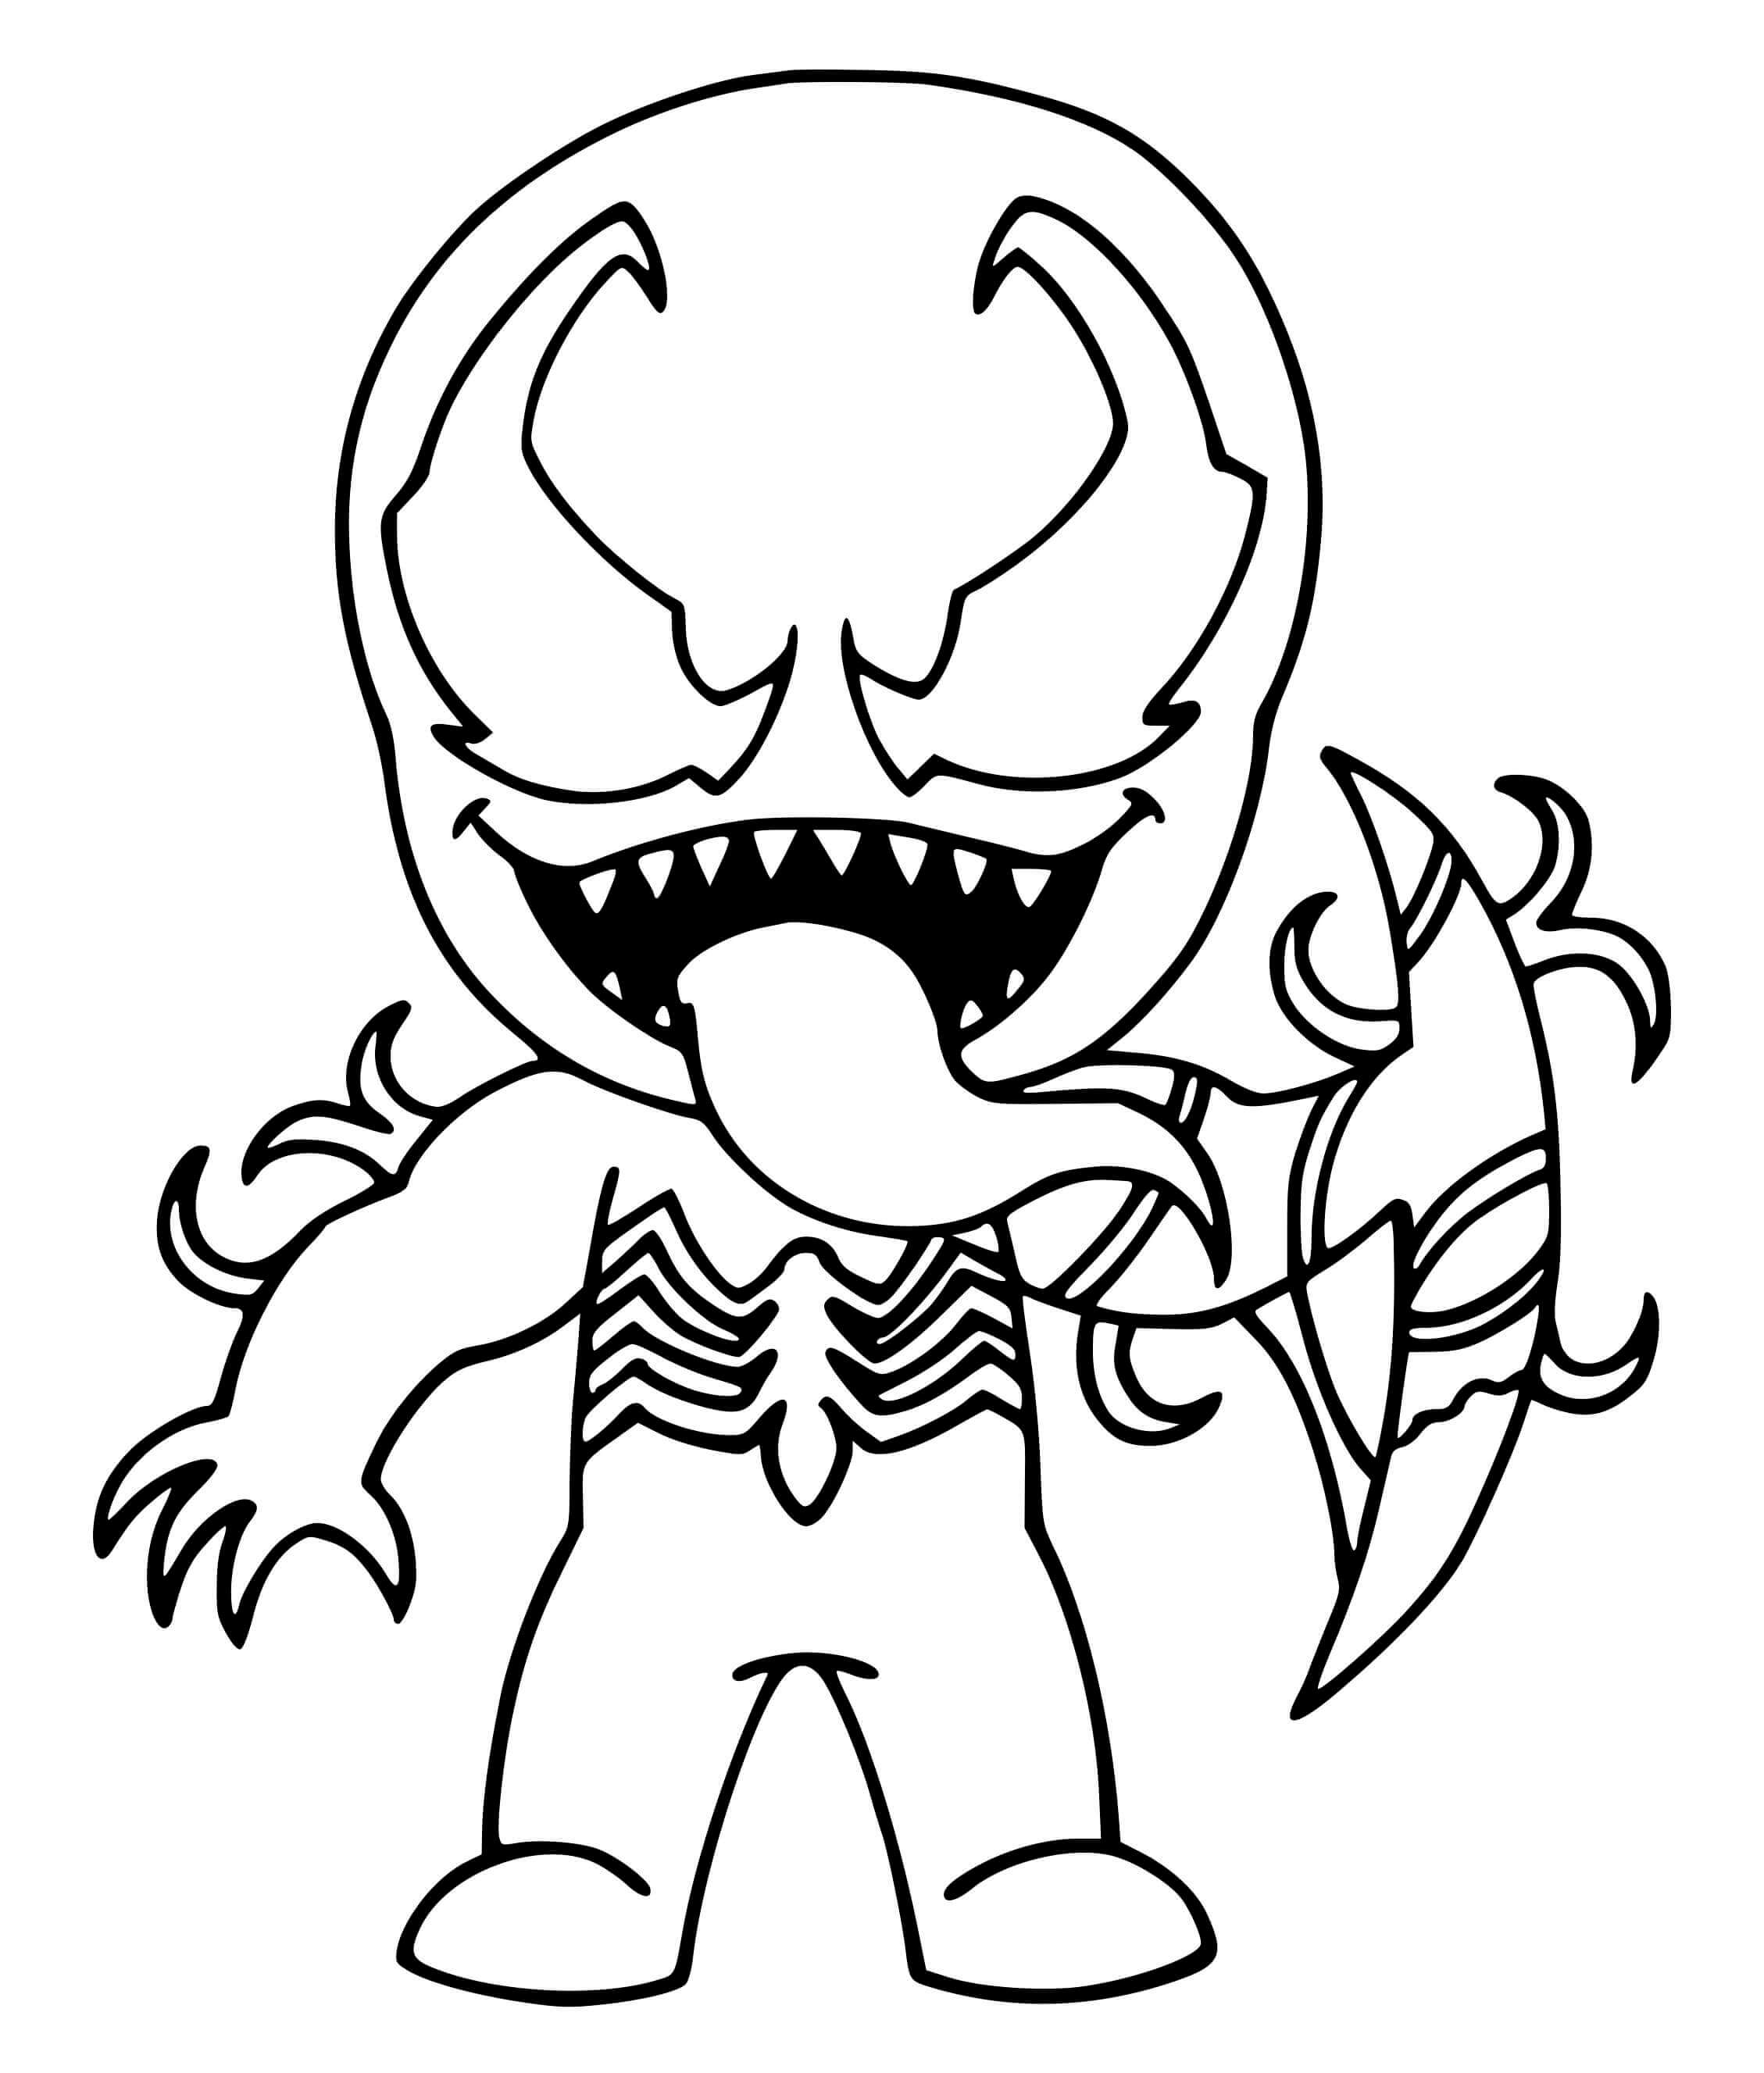 Mythic Venom Fortnite Coloring Pages   Coloring Cool